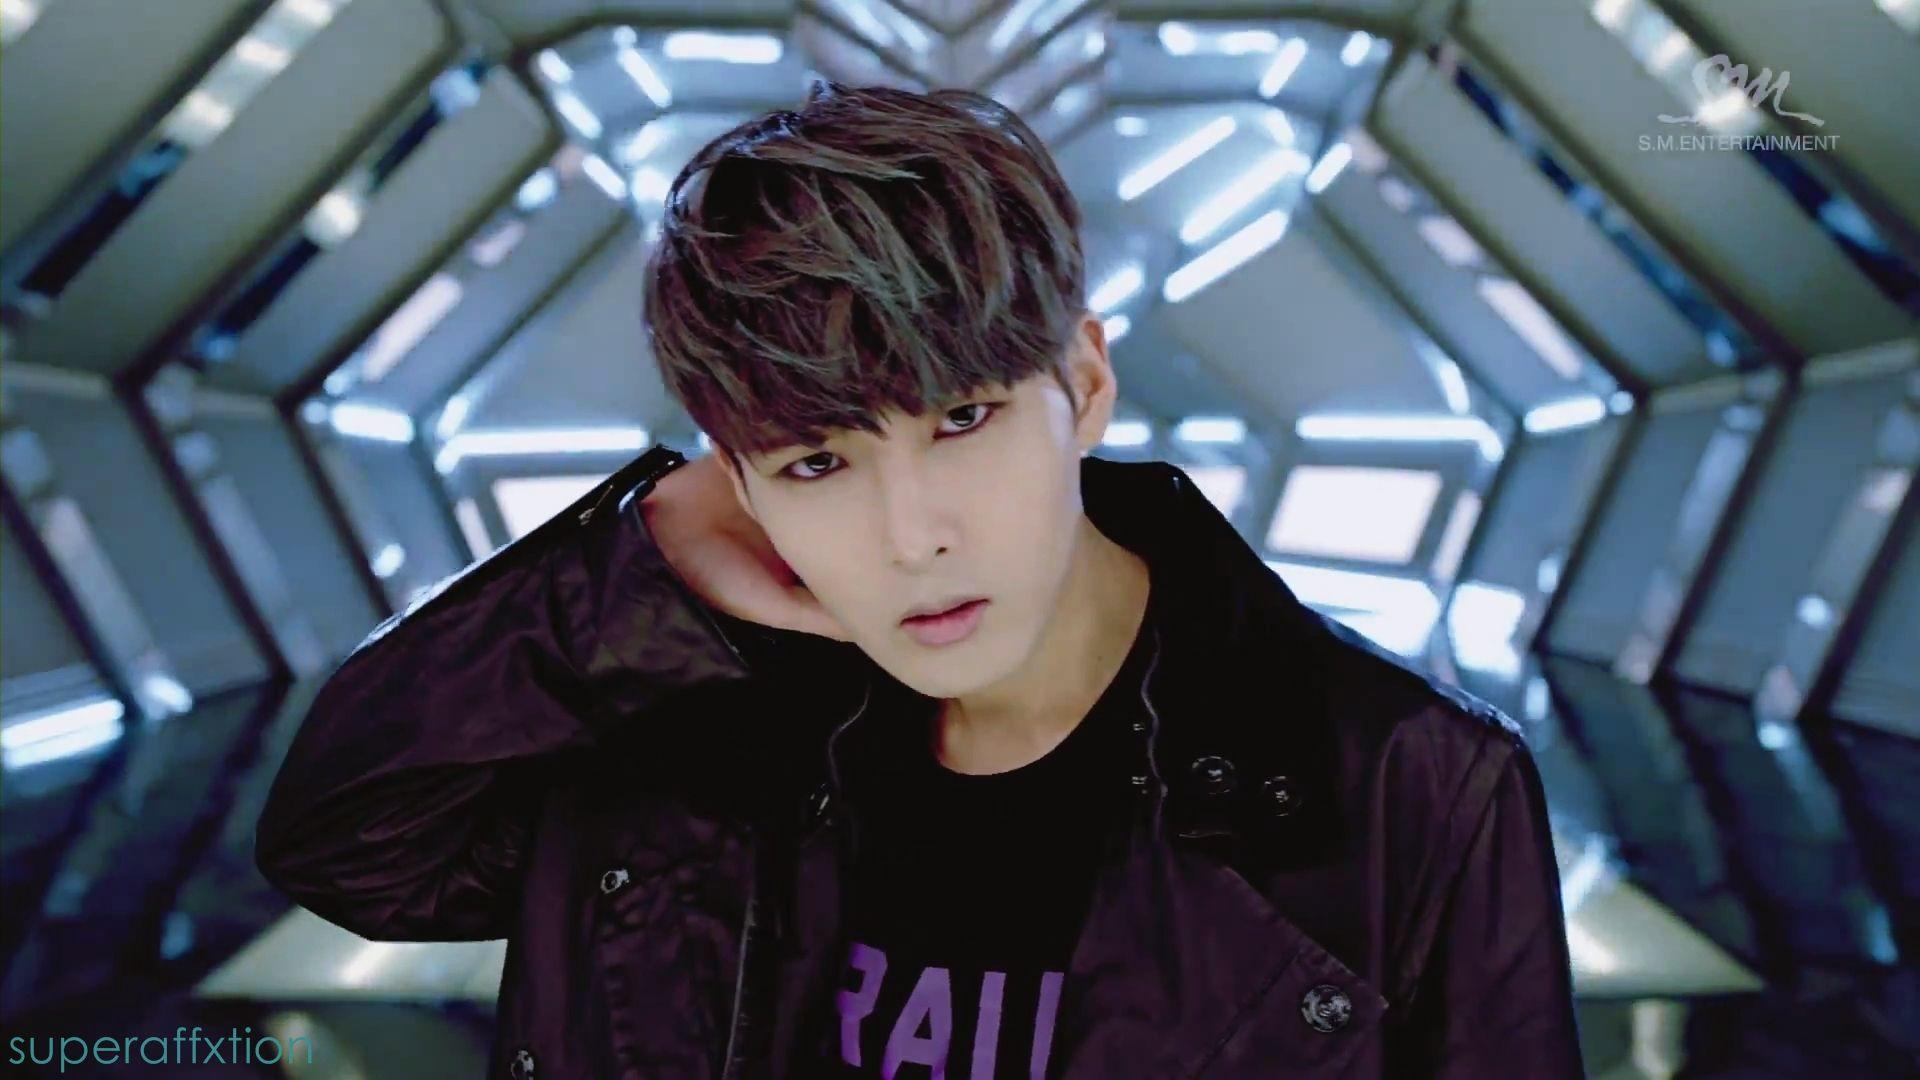 RYEOWOOK. Super Aff(x)tion. For Super Junior & f(x)